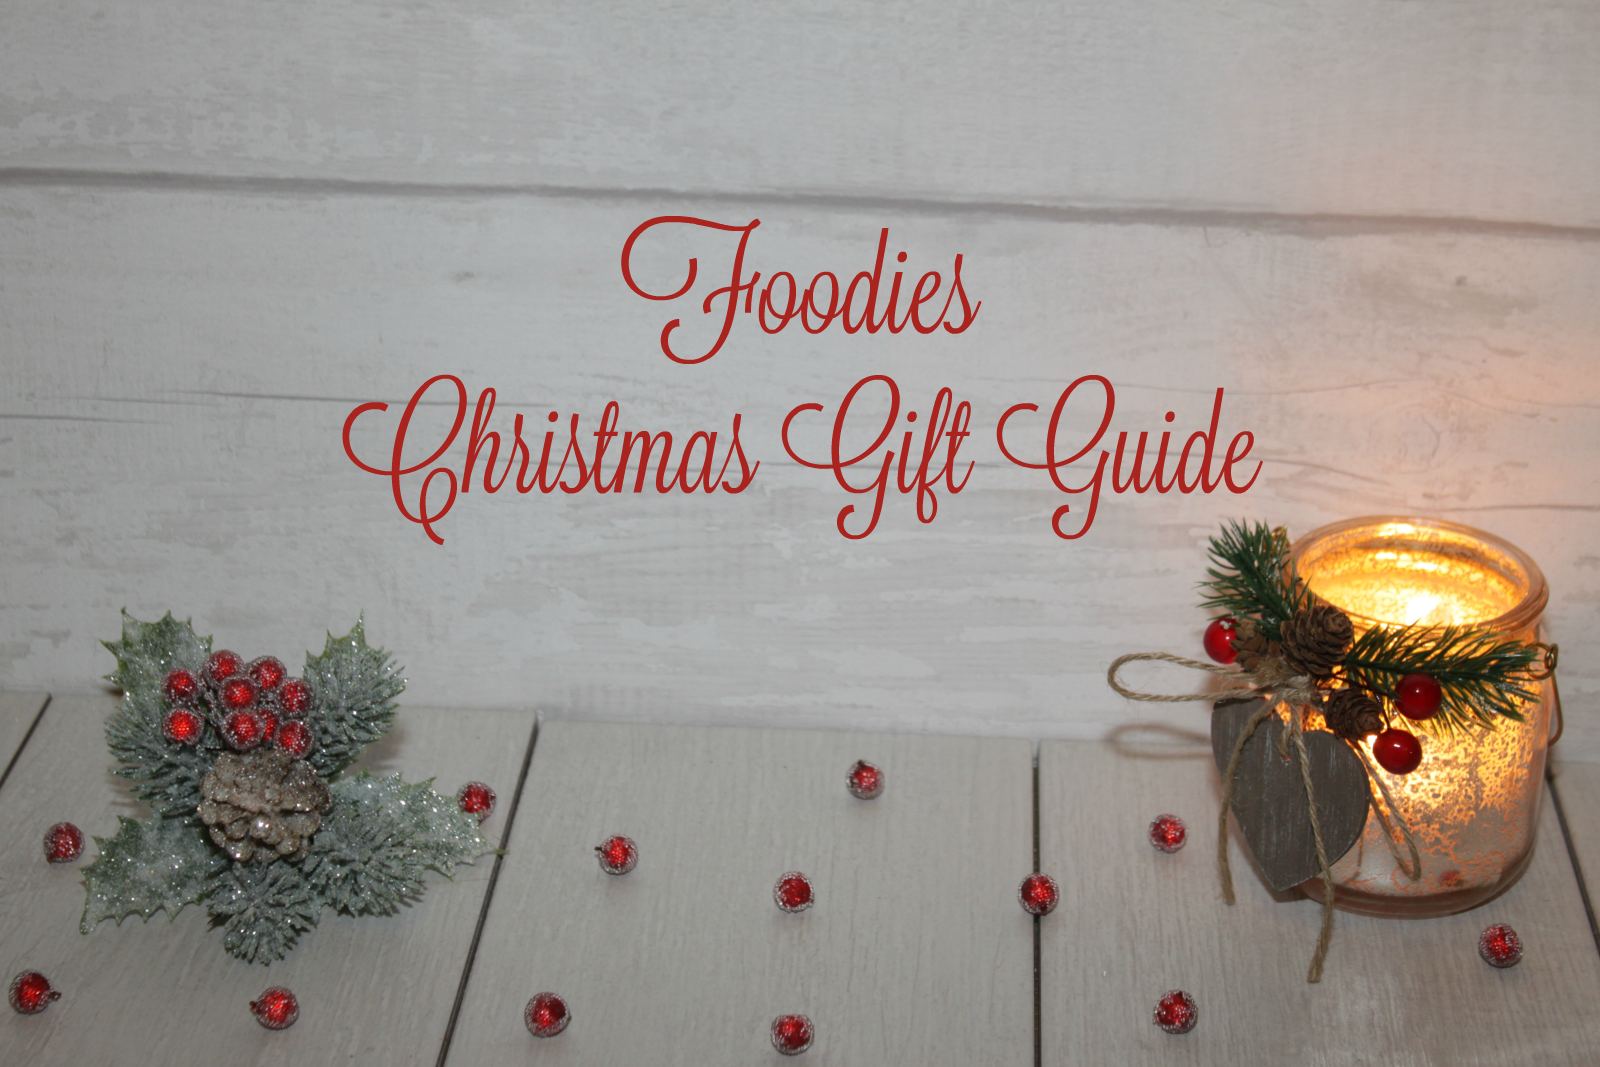 2018 Christmas Gift Guide - For Foodies.